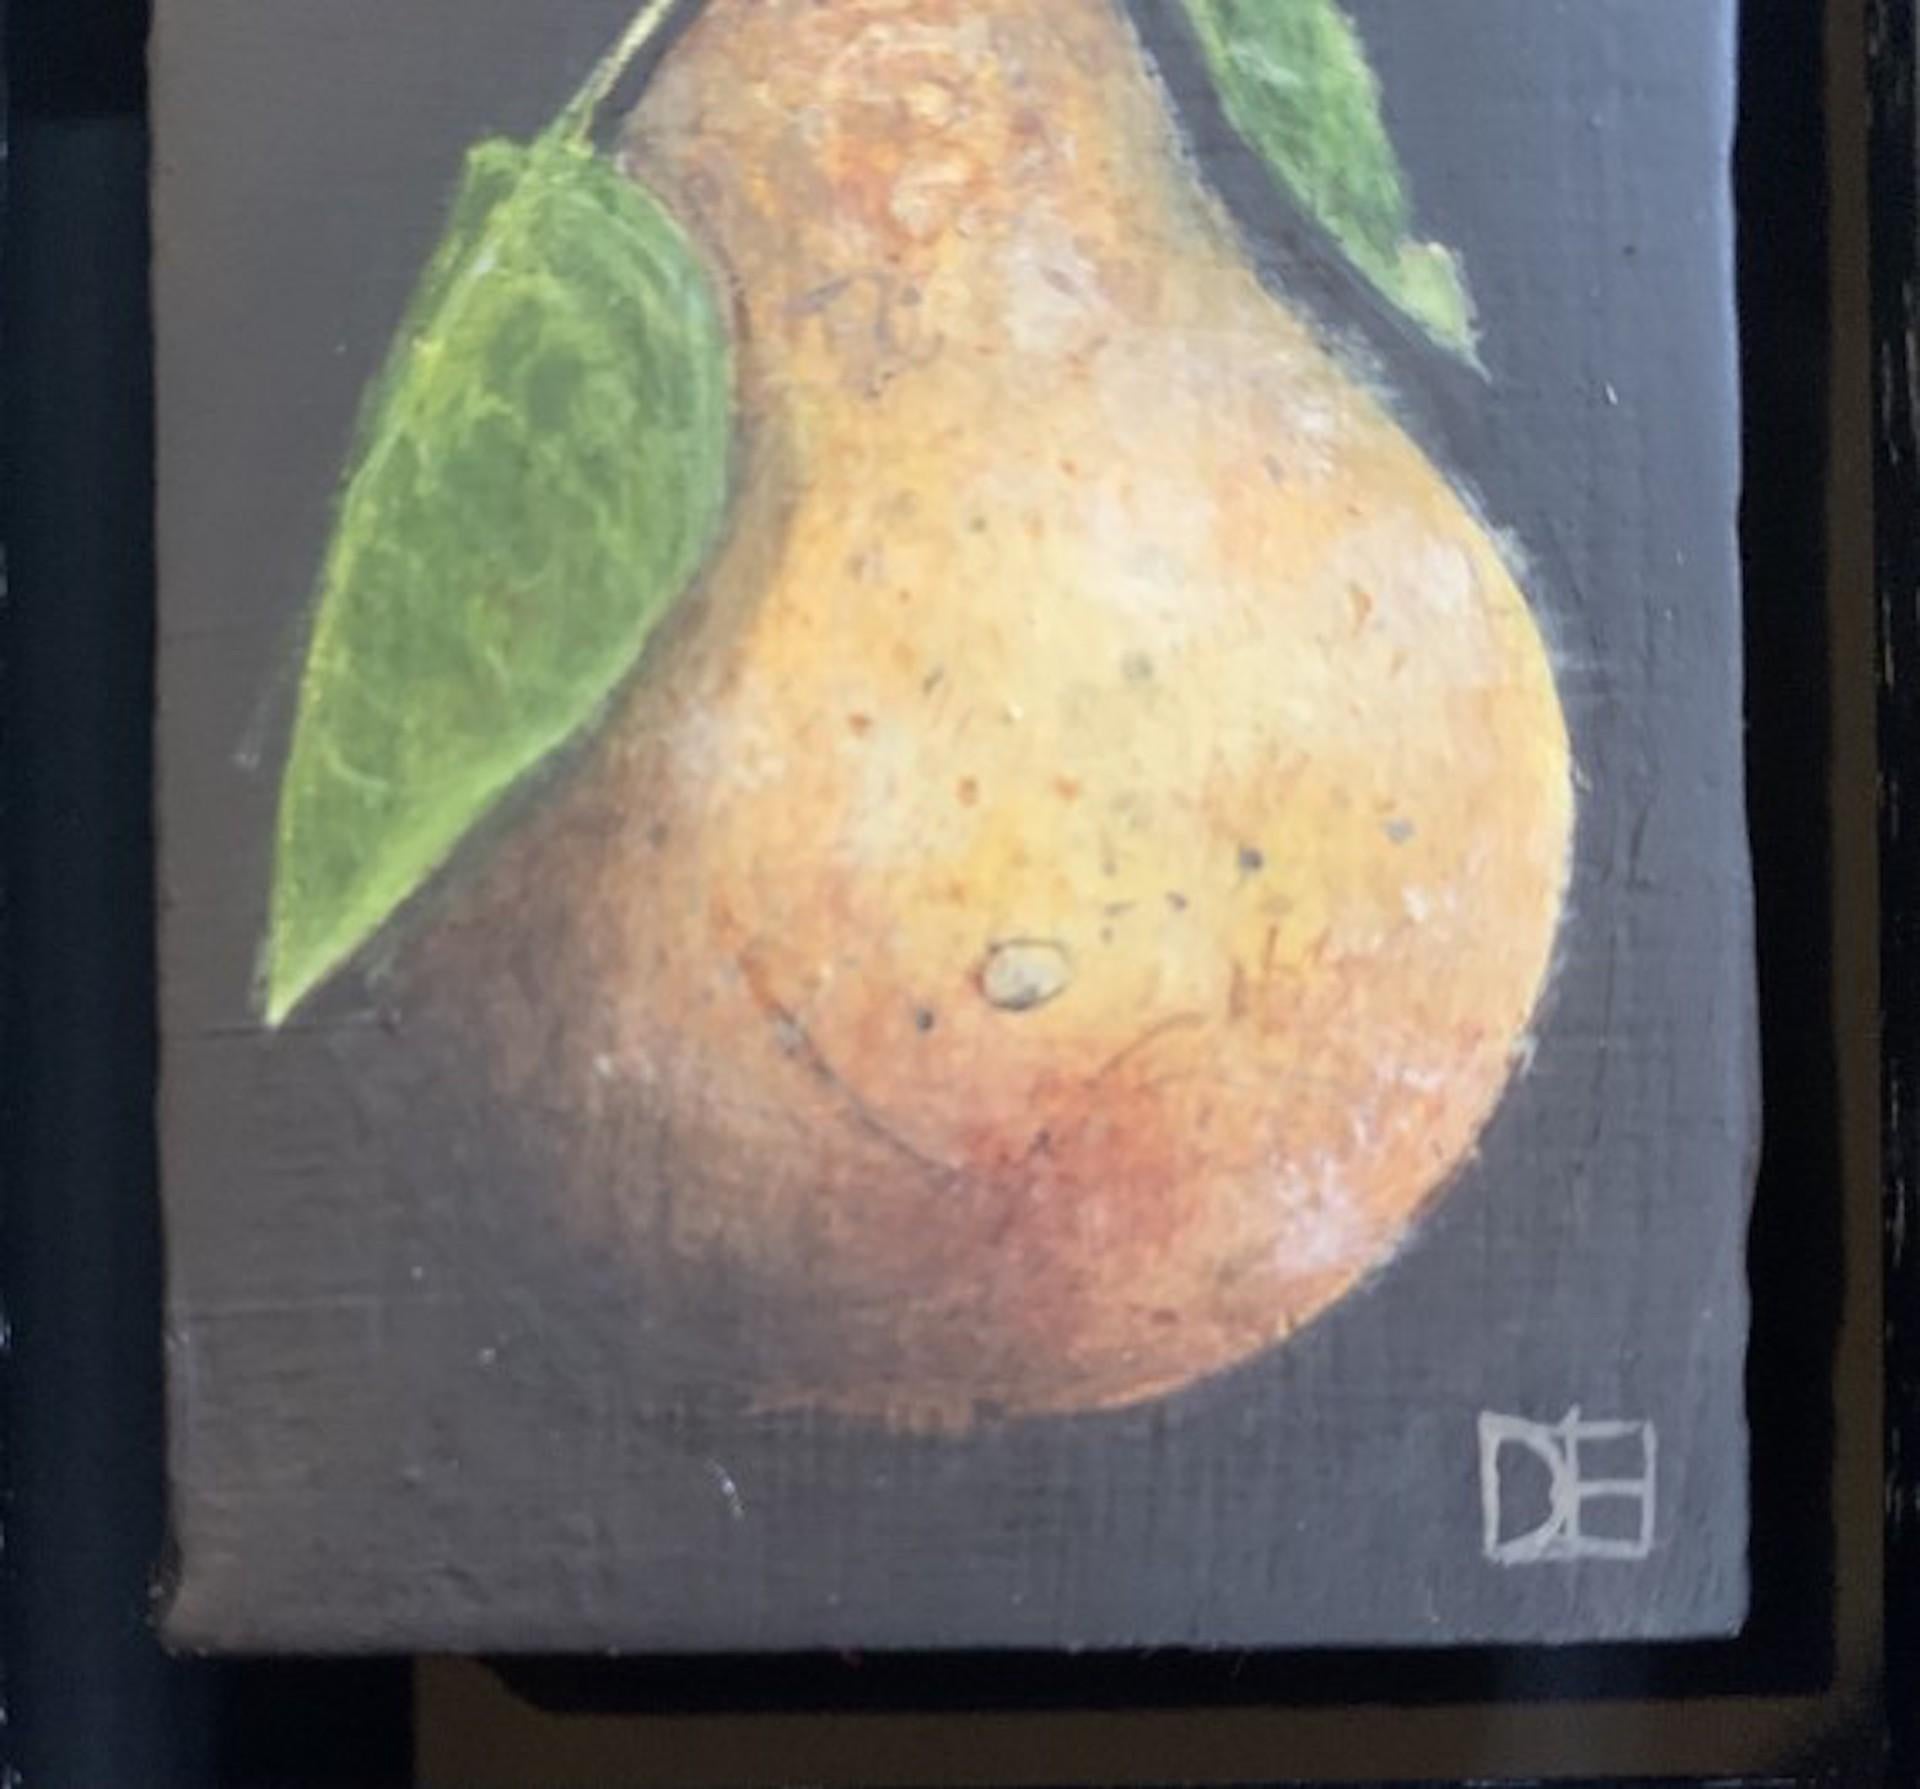 Pocket Yellow Quince by Dani Humberstone [2021]
original

Oil paint on canvas

Image size: H:7 cm x W:5 cm

Complete Size of Unframed Work: H:7 cm x W:5 cm x D:2.5cm

Framed Size: H:18.5 cm x W:16.5 cm x D:3.5cm

Sold Framed

Please note that insitu